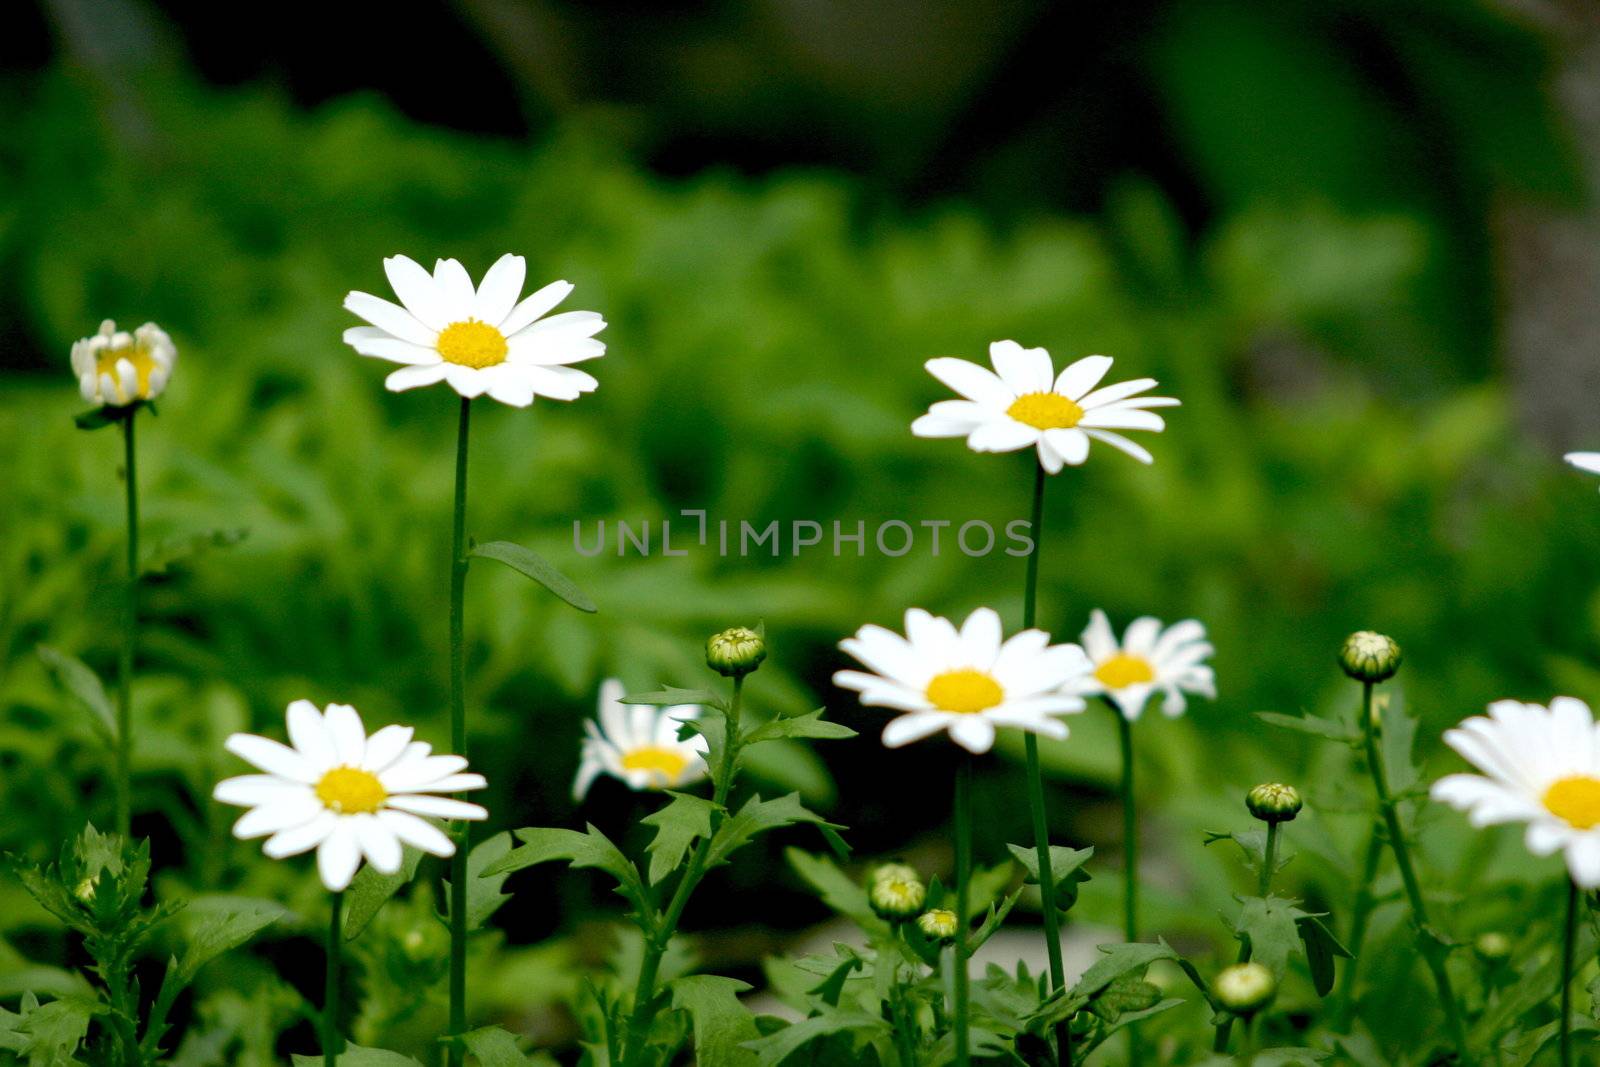 daisies by leafy